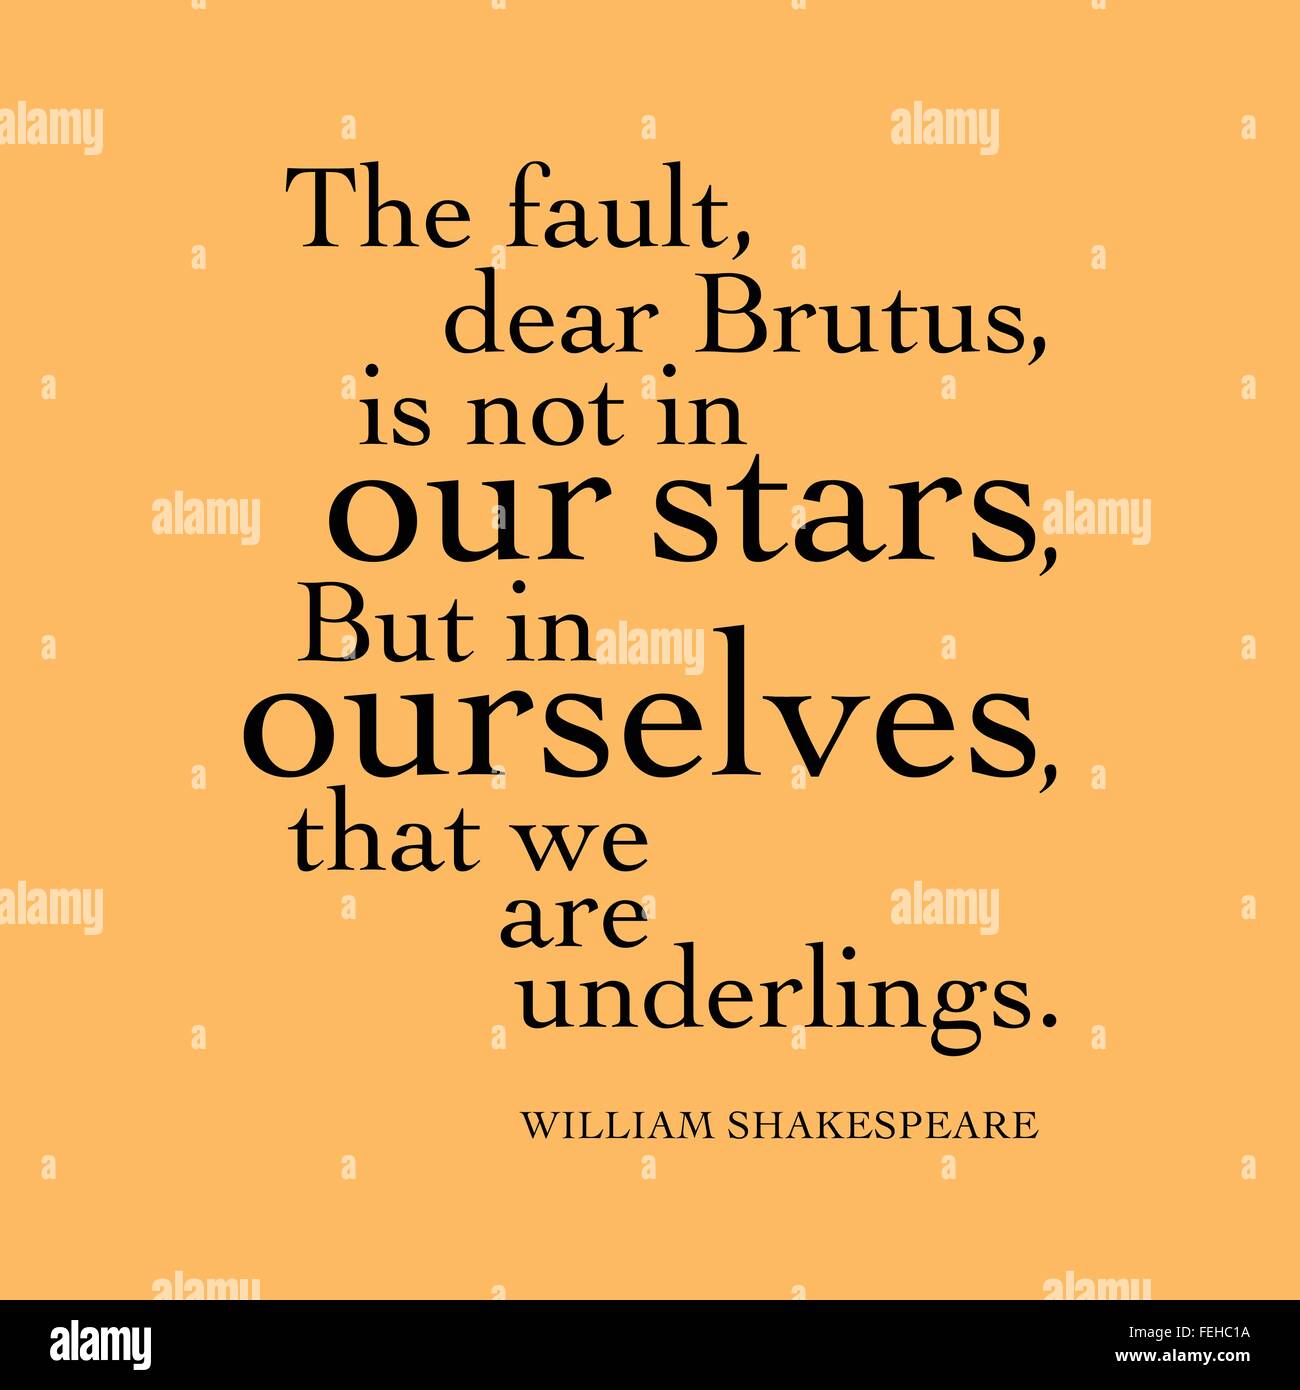 'The fault, dear Brutus, is not in our stars, But in ourselves, that we are underlings.' William Shakespeare Stock Vector